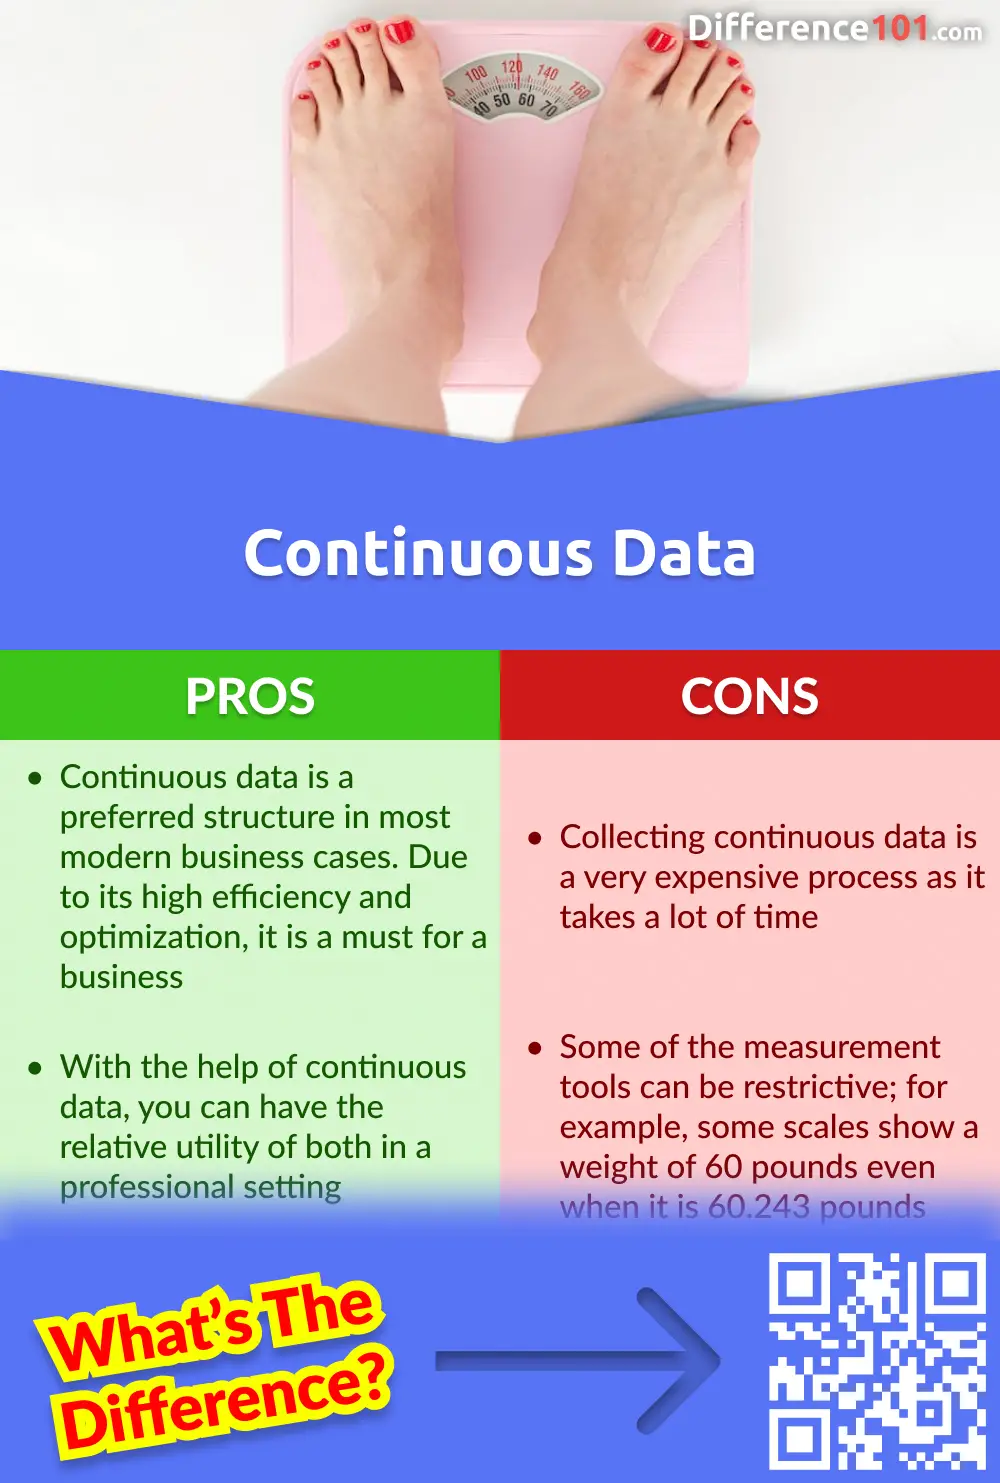 Continuous Data Pros and Cons
